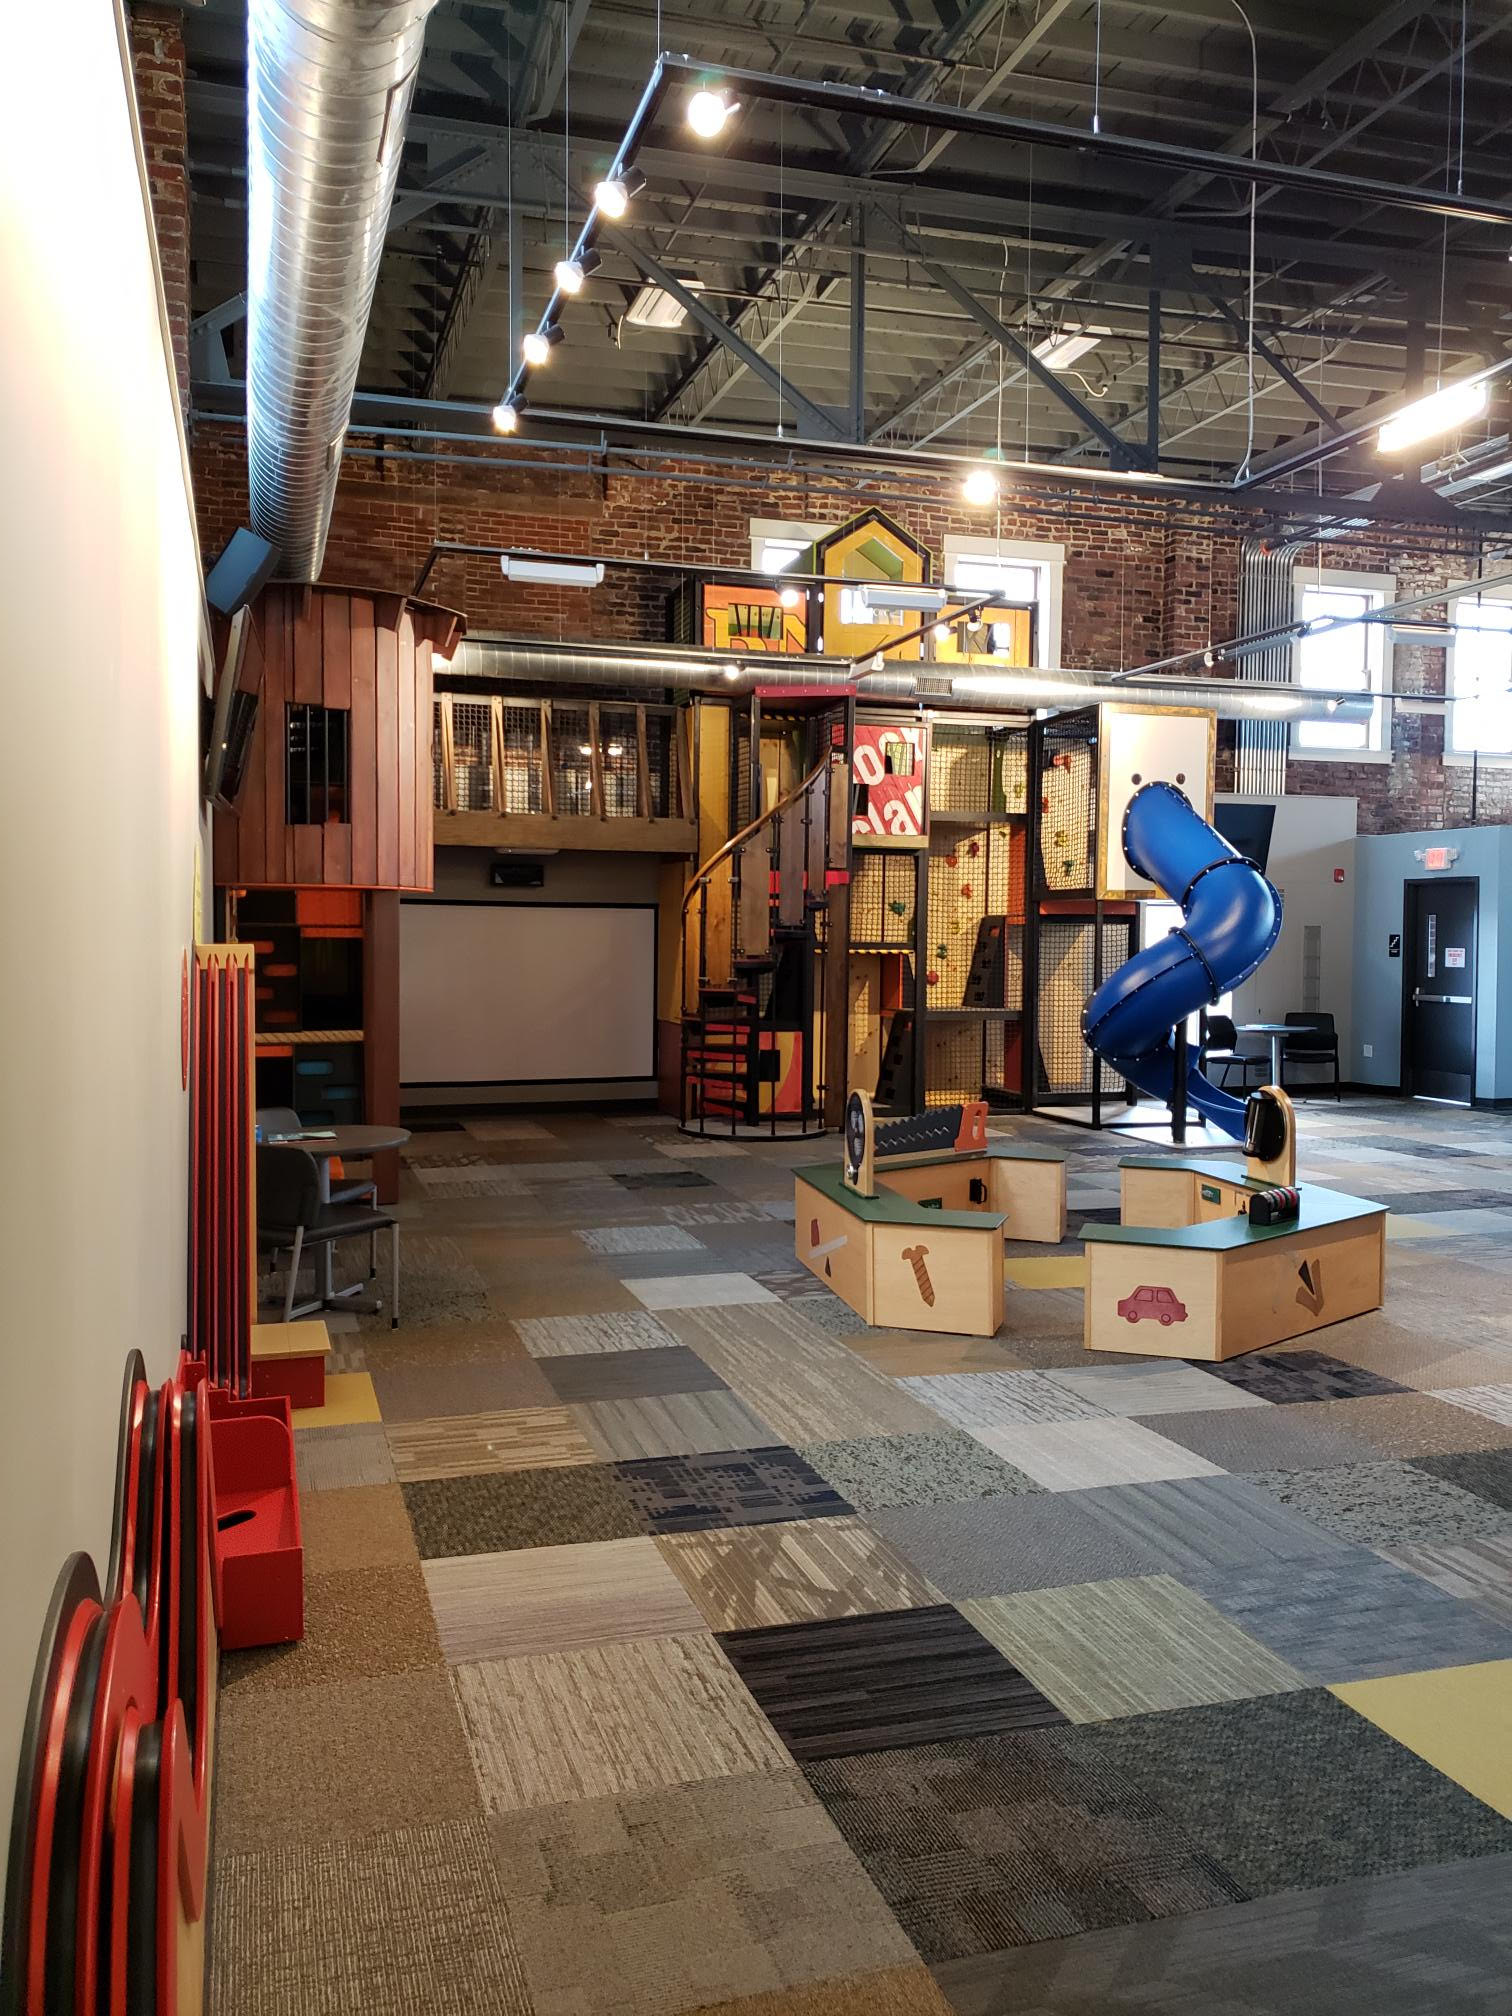 Discovery Depot Second Floor with Jungle Gym and Slide